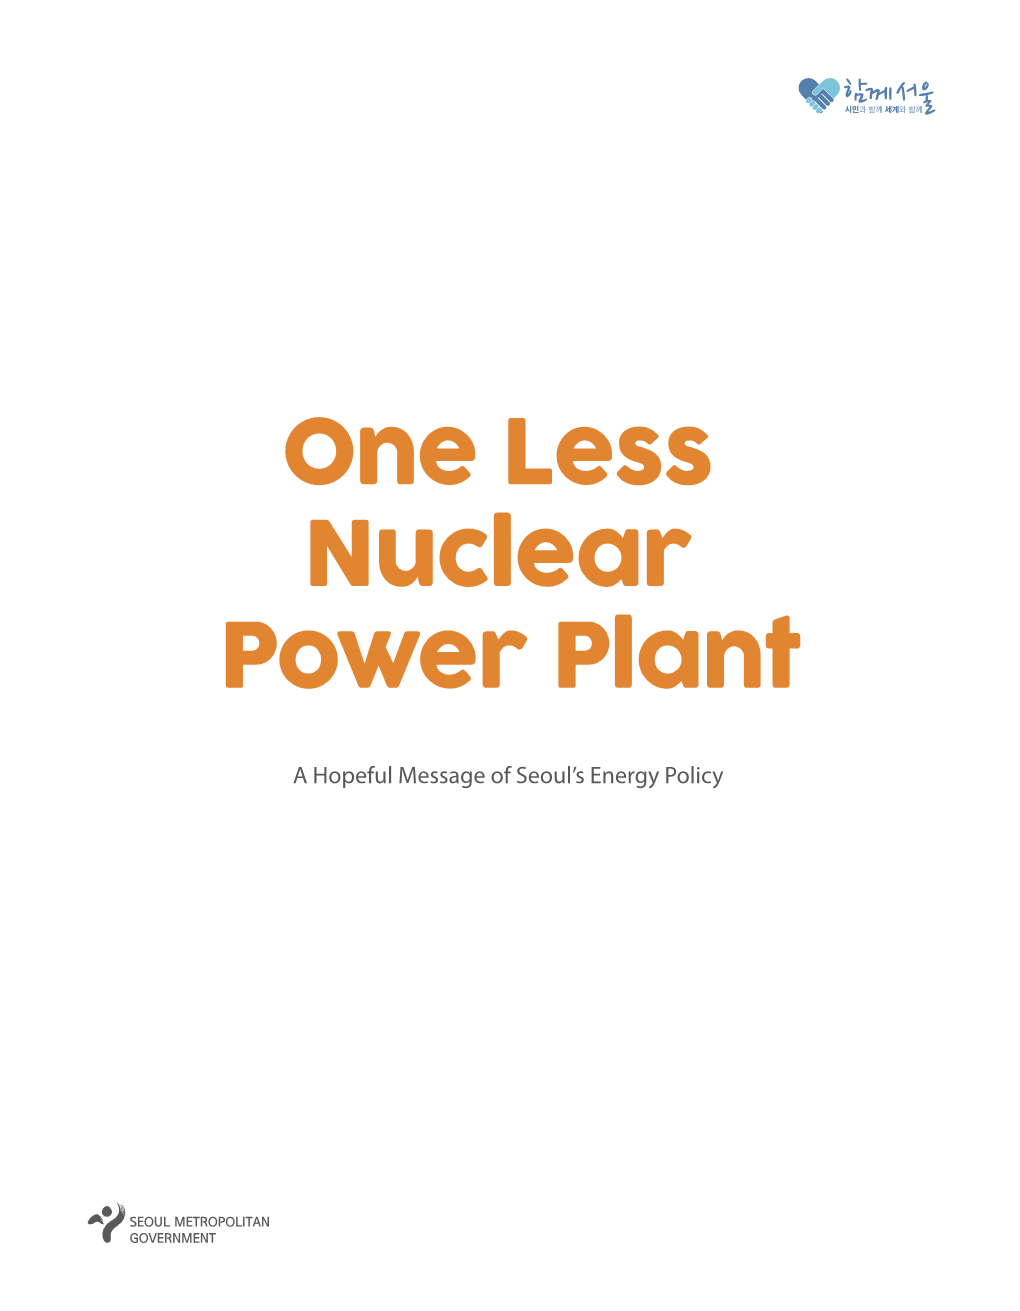 One Less Nuclear Power Plant